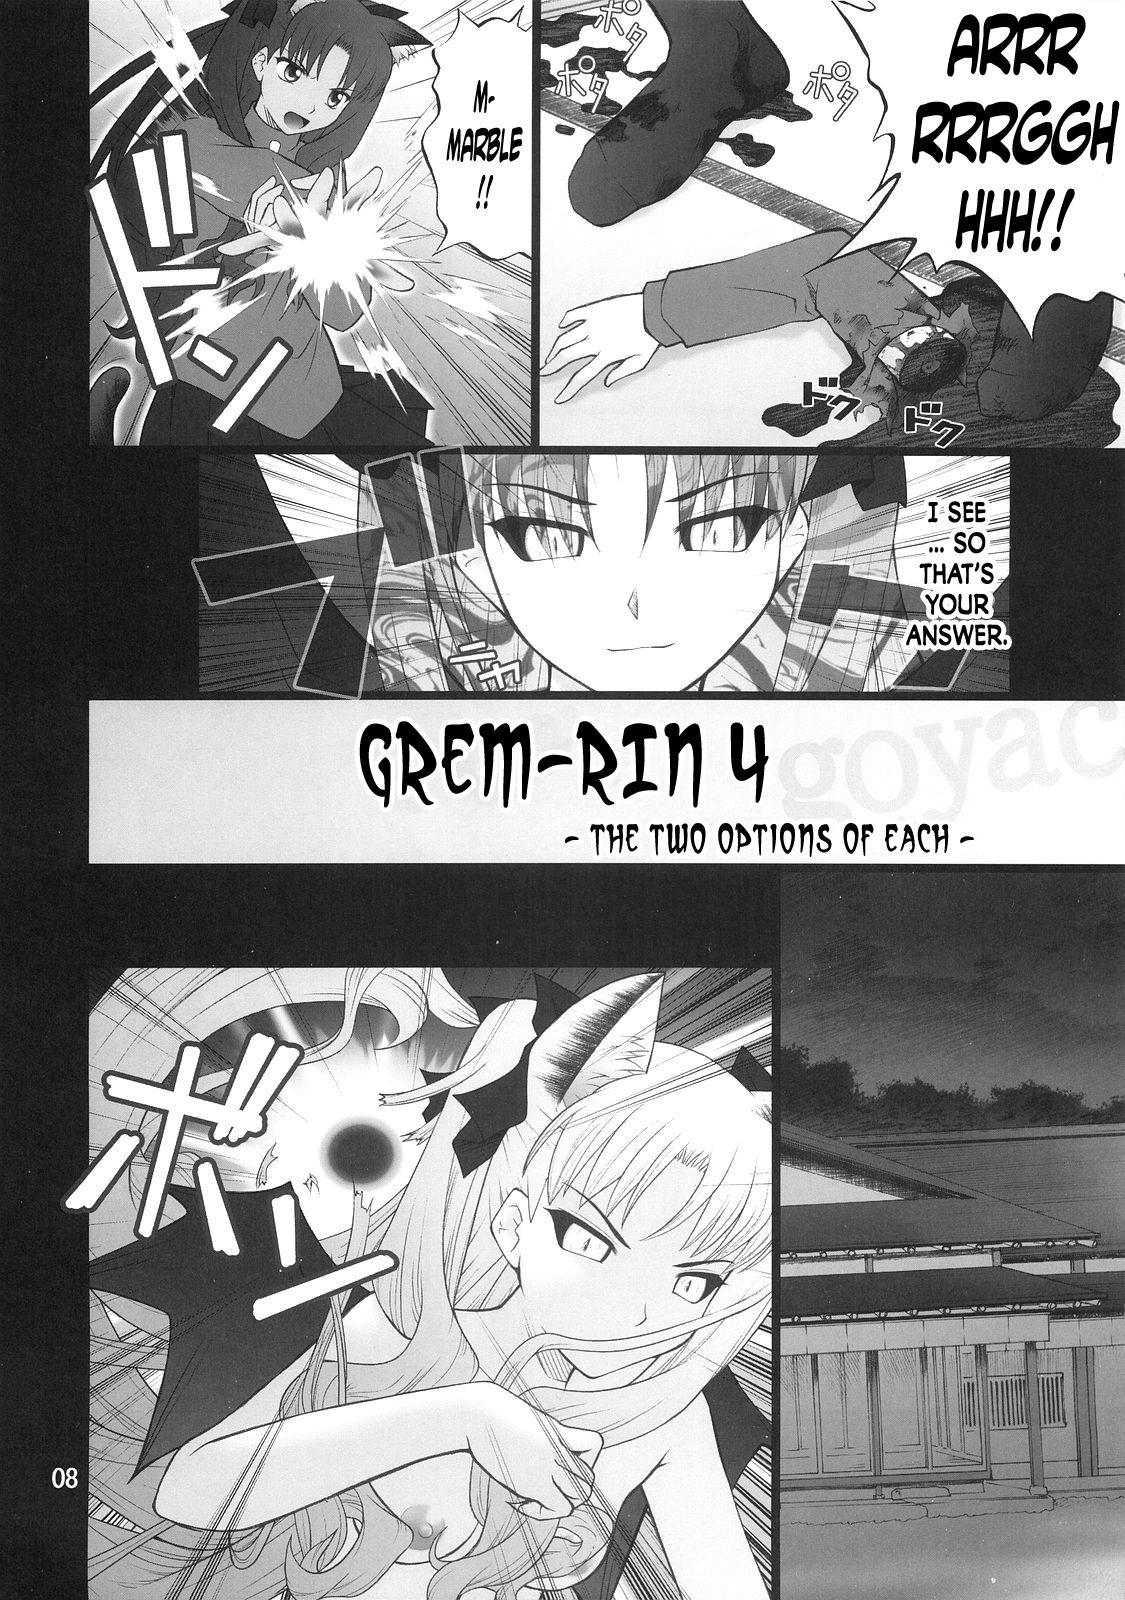 Facesitting Grem-Rin 4 - Fate stay night Vip - Page 7